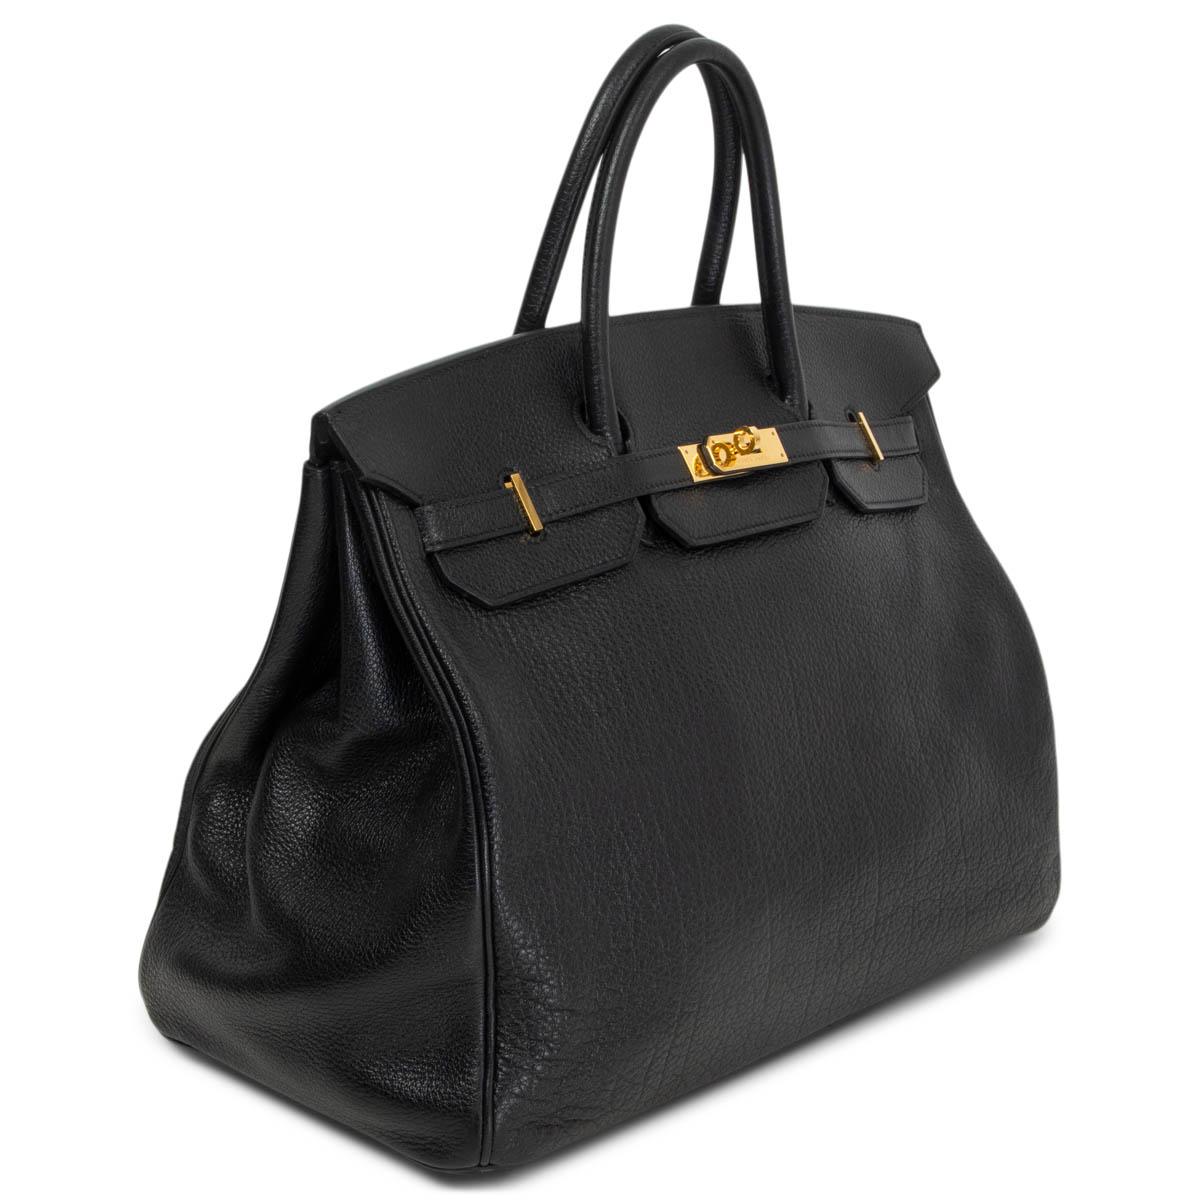 100% authentic Hermès Birkin 40 bag in black Buffalo Skipper leather with gold-tone hardware. Lined in black Chevre (goat skin) with an open pocket against the front and a zipper pocket against the back. Has been carried and is in excellent